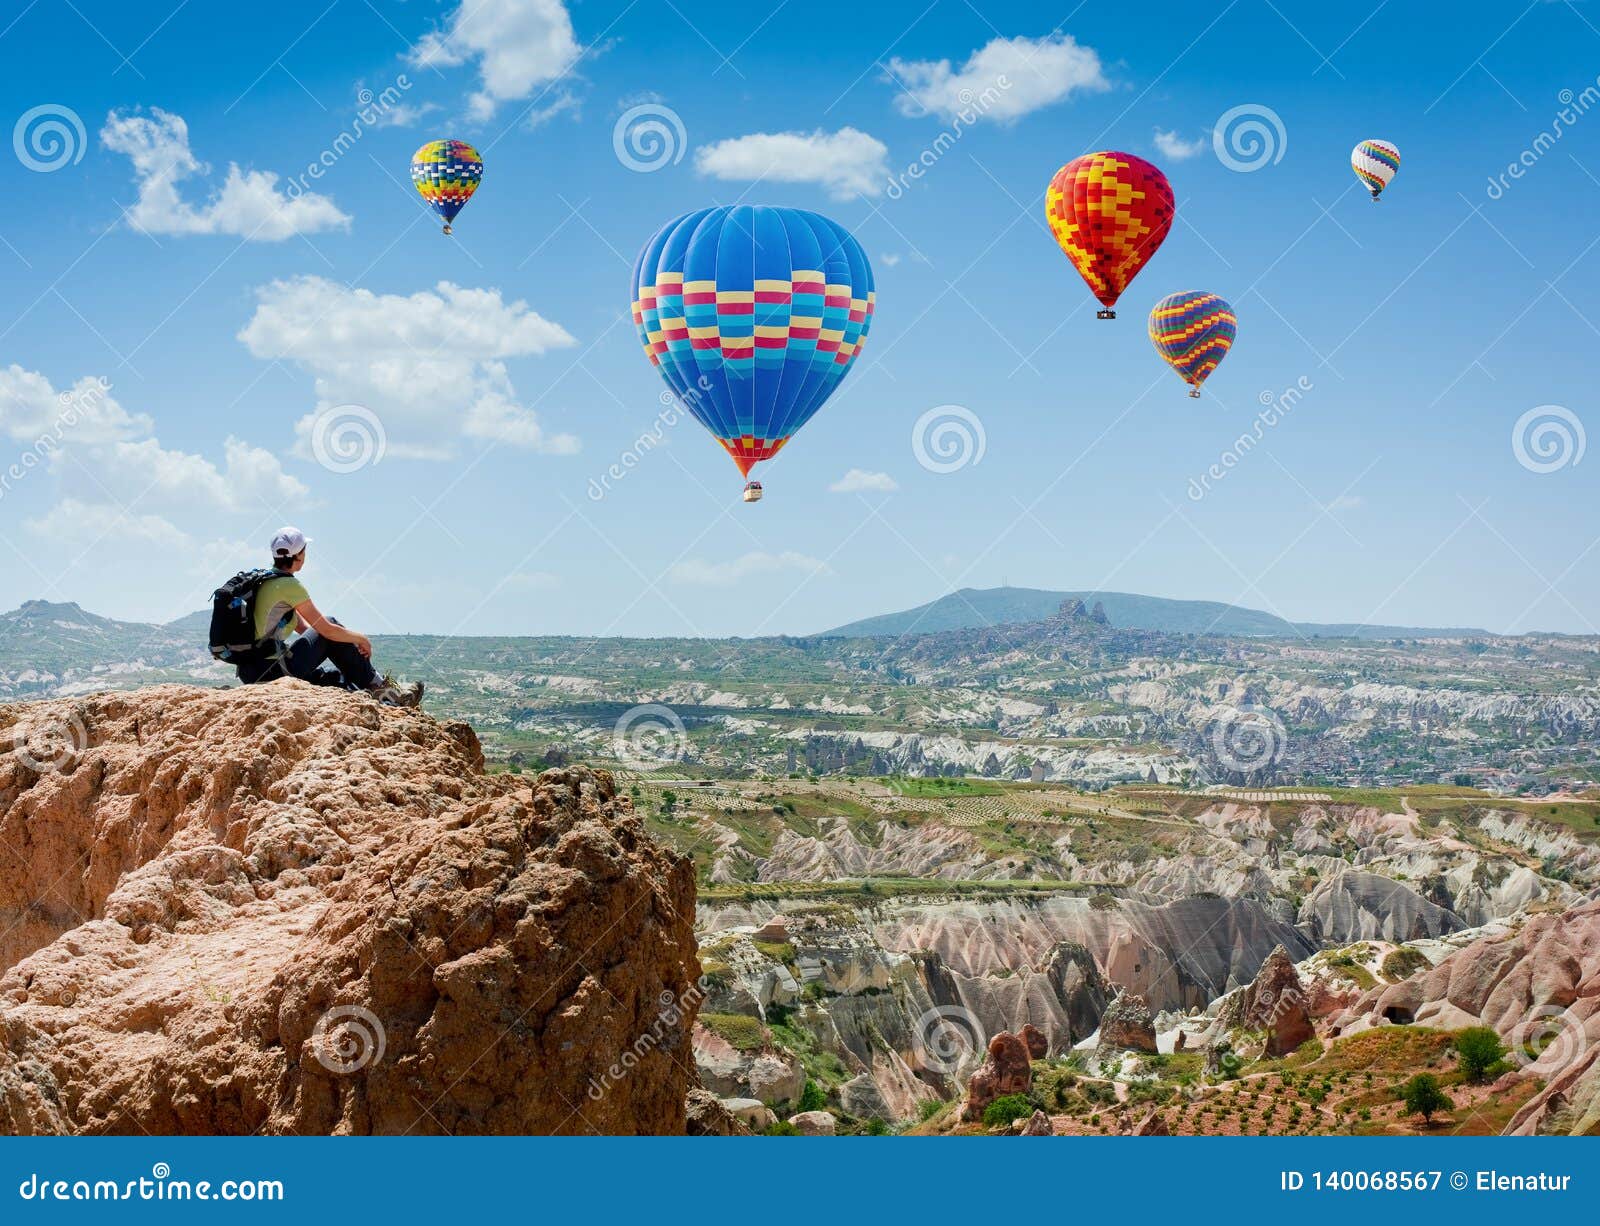 amazing view with sport sitting girl and a lot of hot air balloons. national park anatolia, cappadocia, turkey. artistic picture